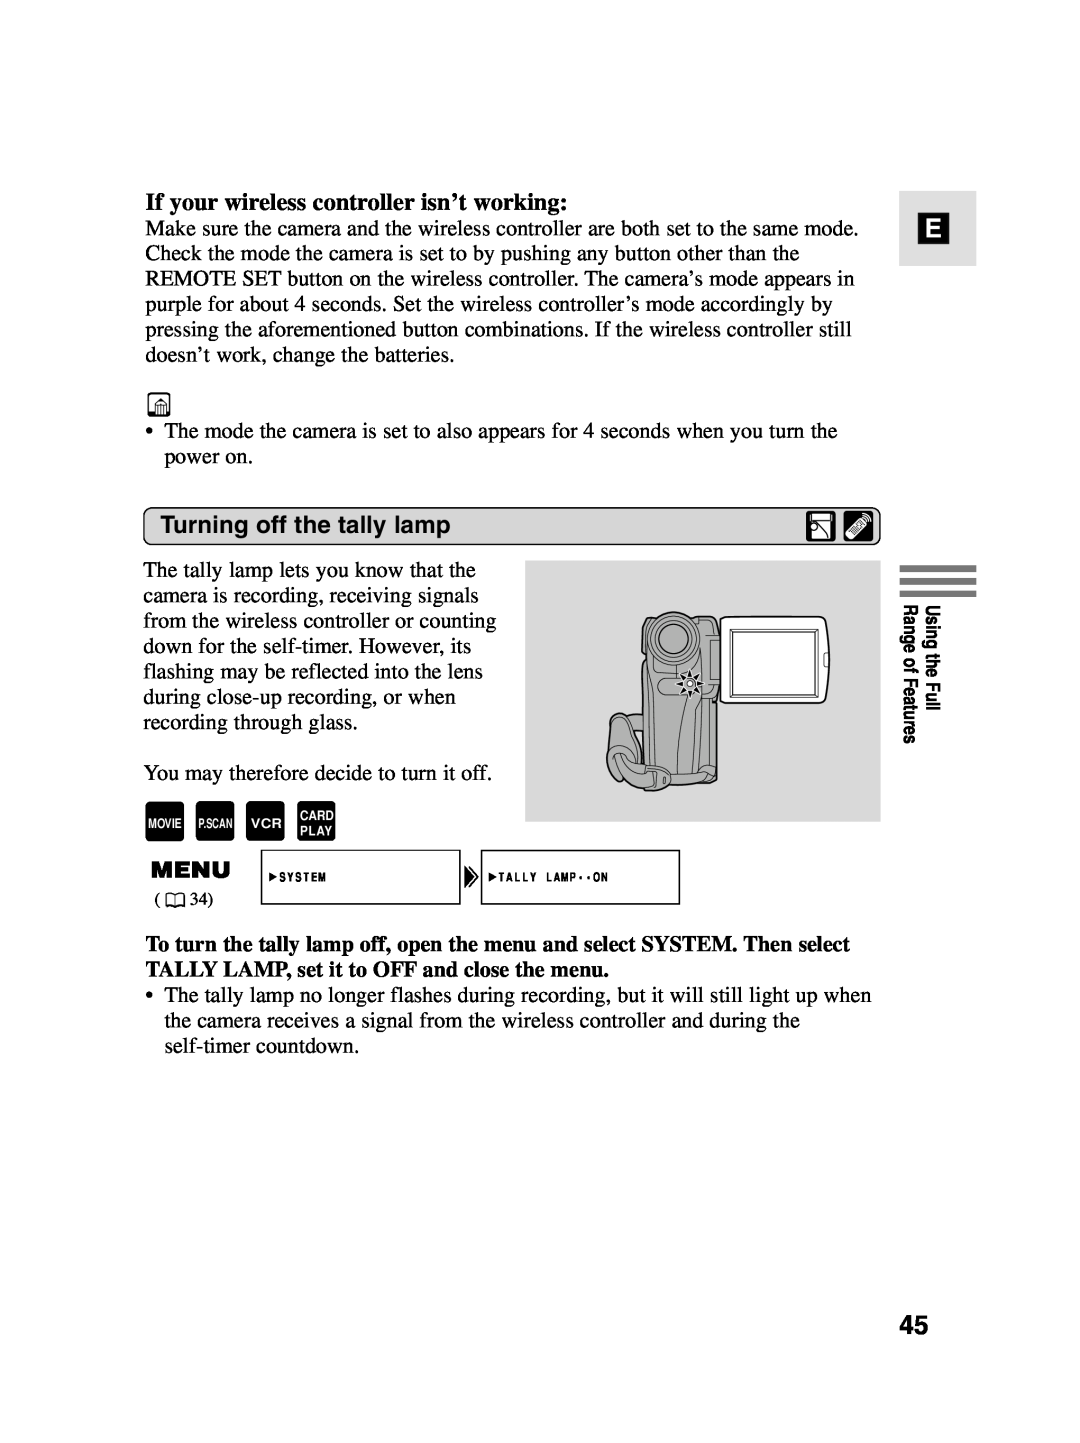 Canon MV4i MC instruction manual If your wireless controller isn’t working, Turning off the tally lamp 